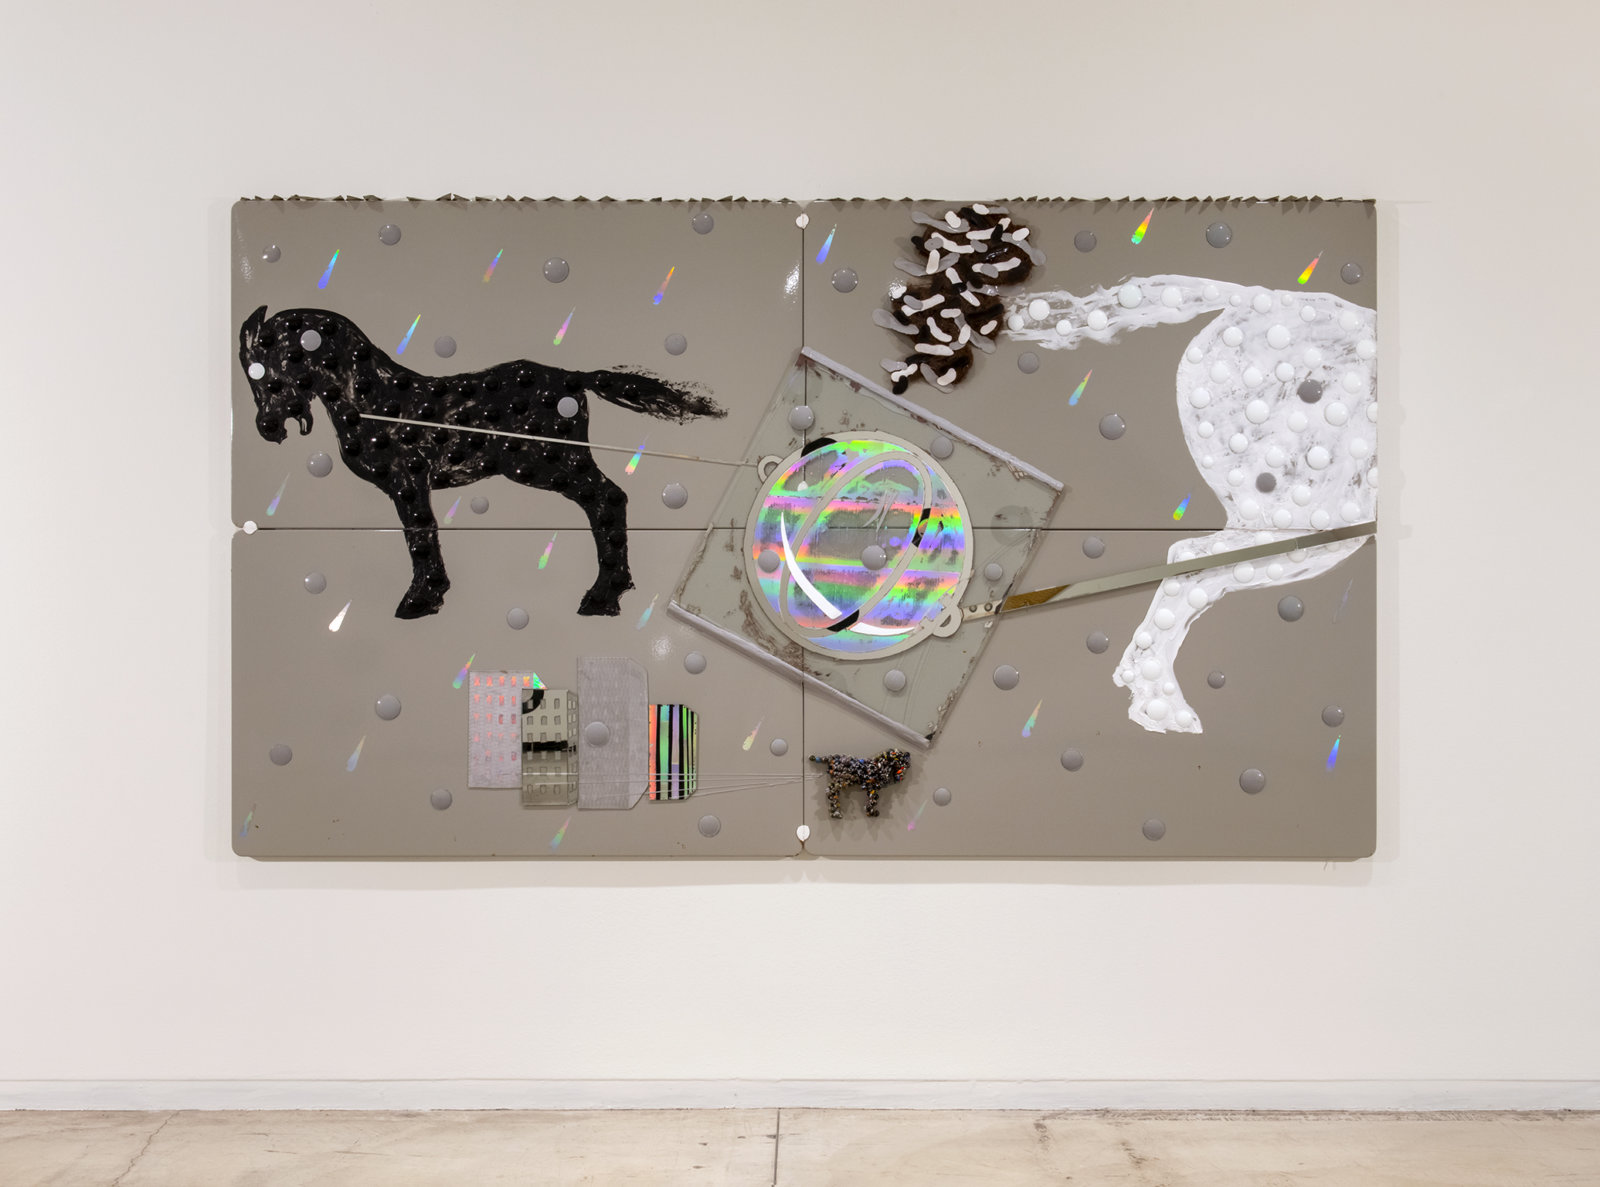 Jerry Pethick, Working the Reign, 1985, enamelled steel, watch glass, silicone, silver diffraction foil, aluminum, etched mirror, marbles, steel wool, mirror, 110 x 39 x 2 in. (280 x 100 x 6 cm)